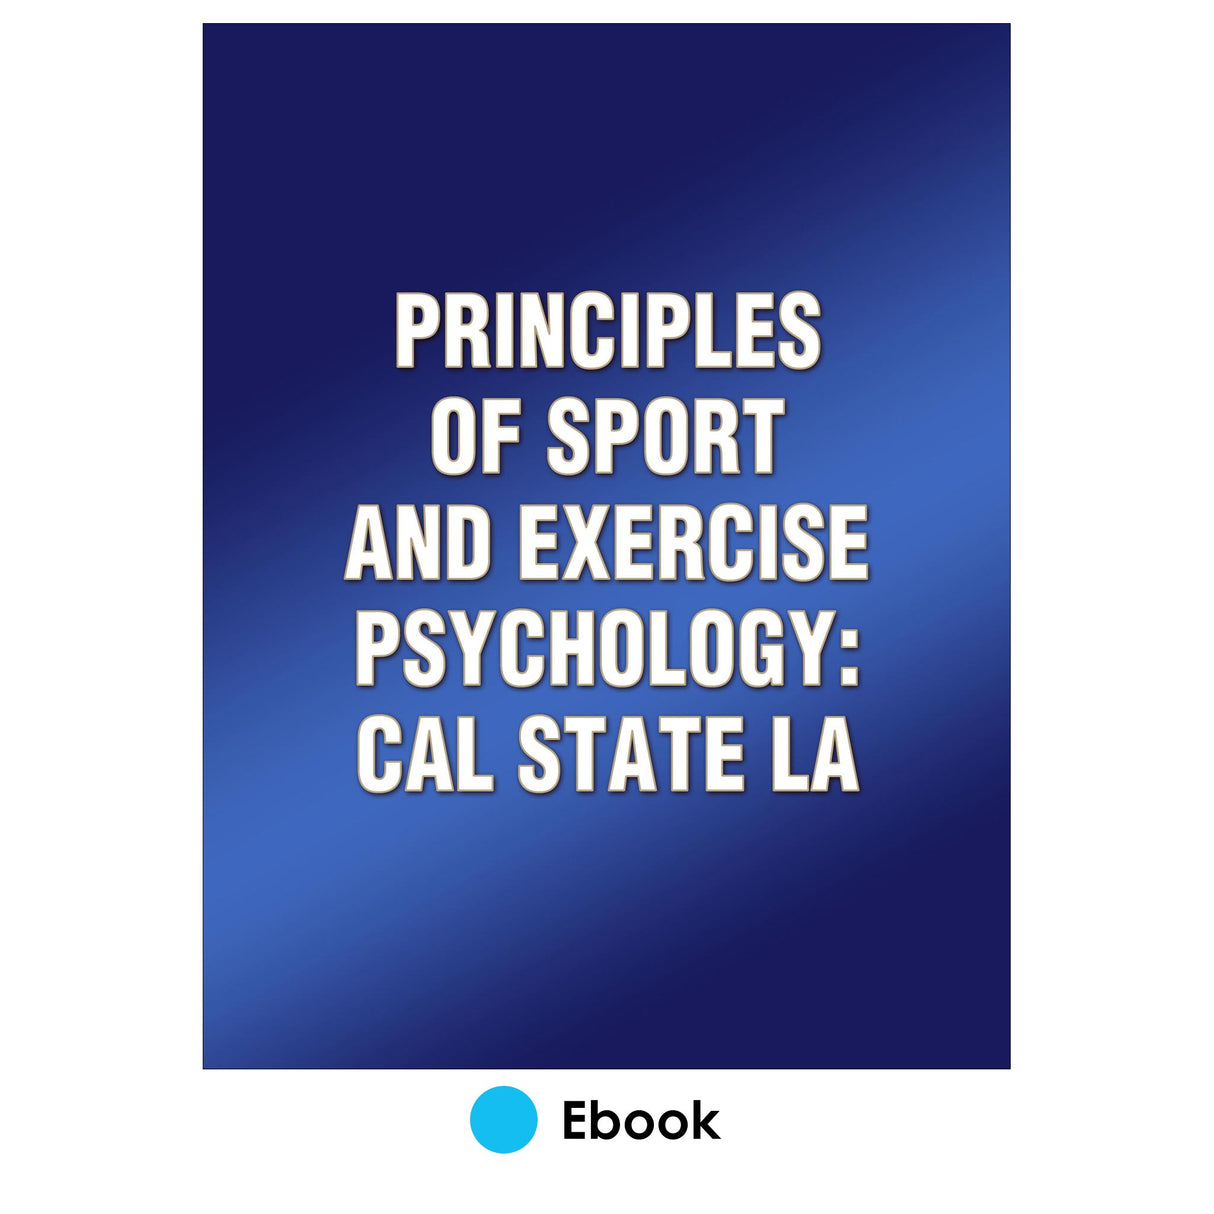 Principles of Sport and Exercise Psychology: Cal State LA